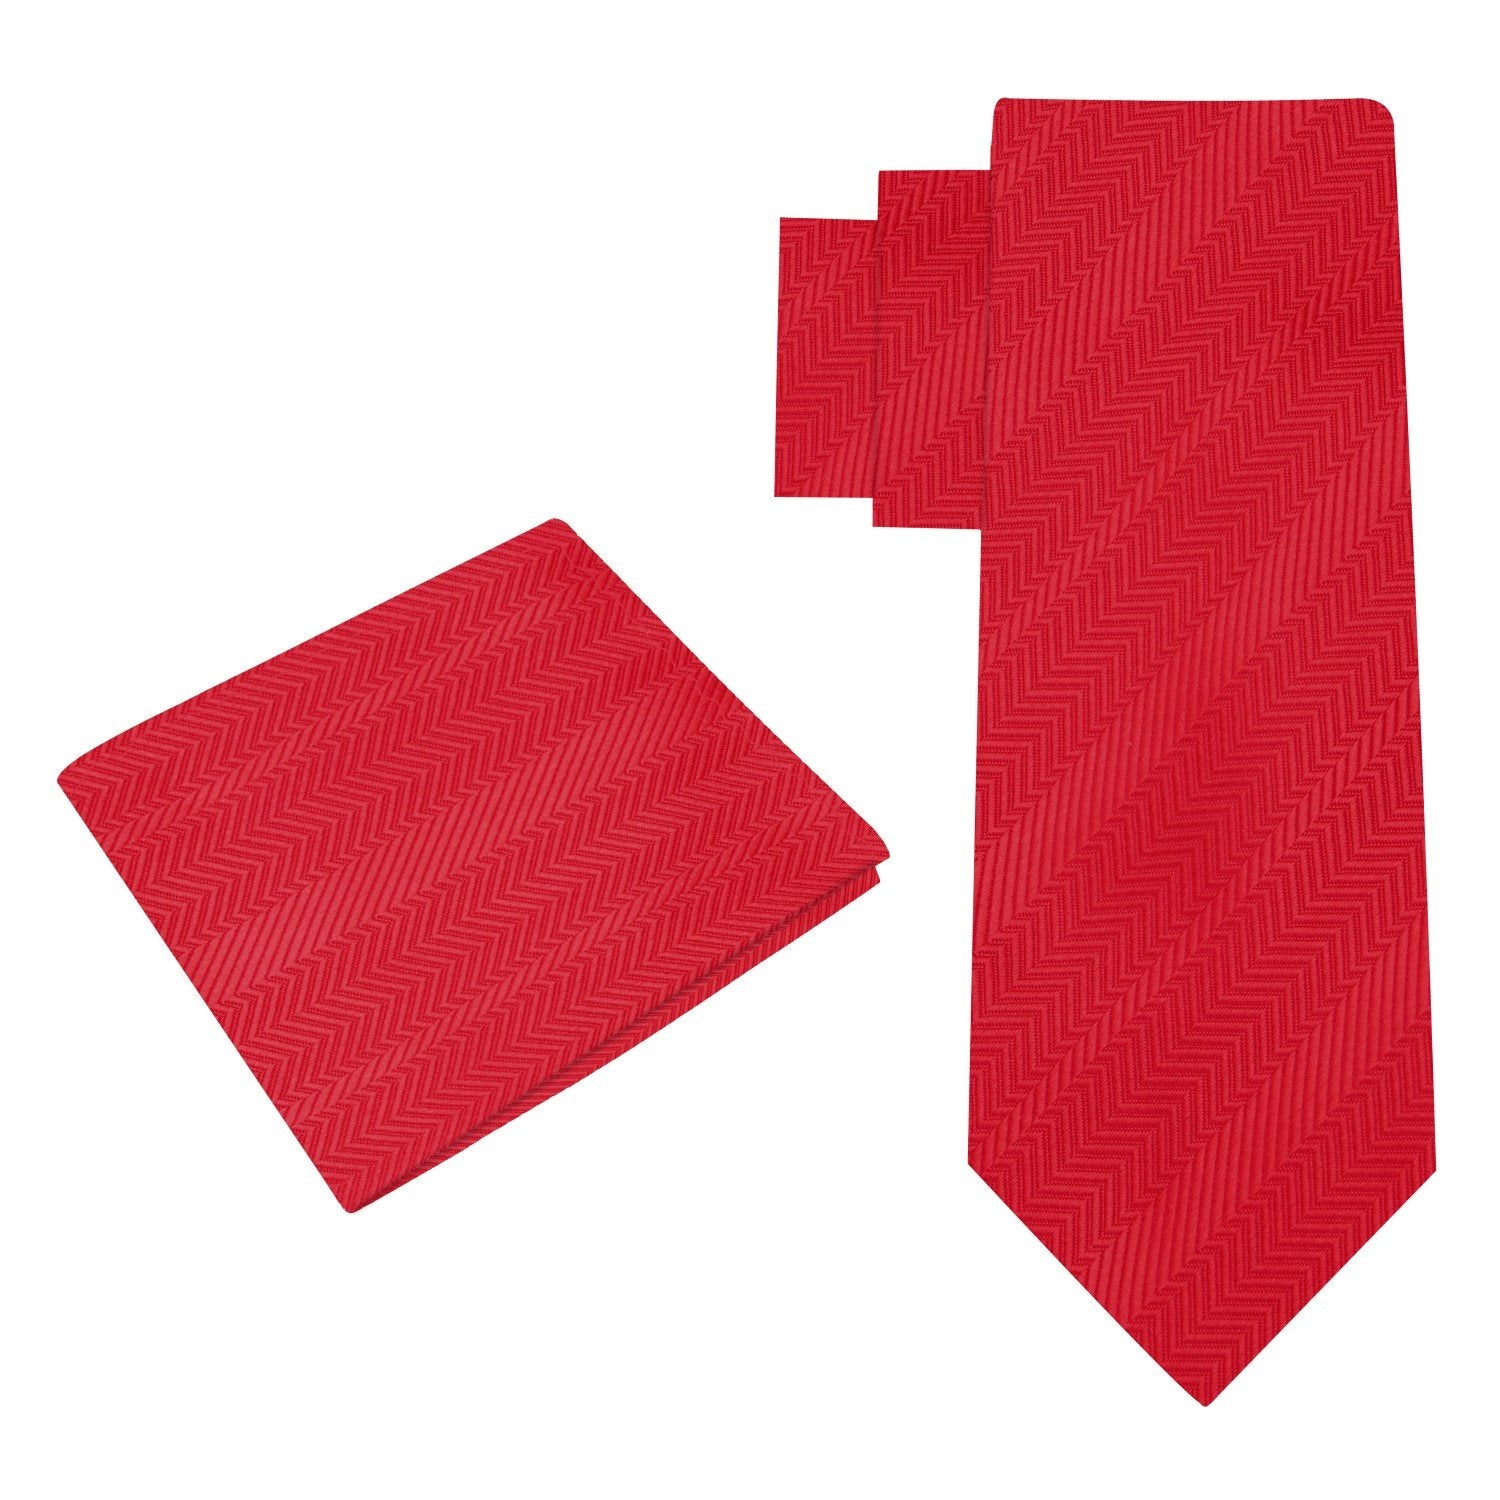 Alt View: Real Red Tie and Pocket Square